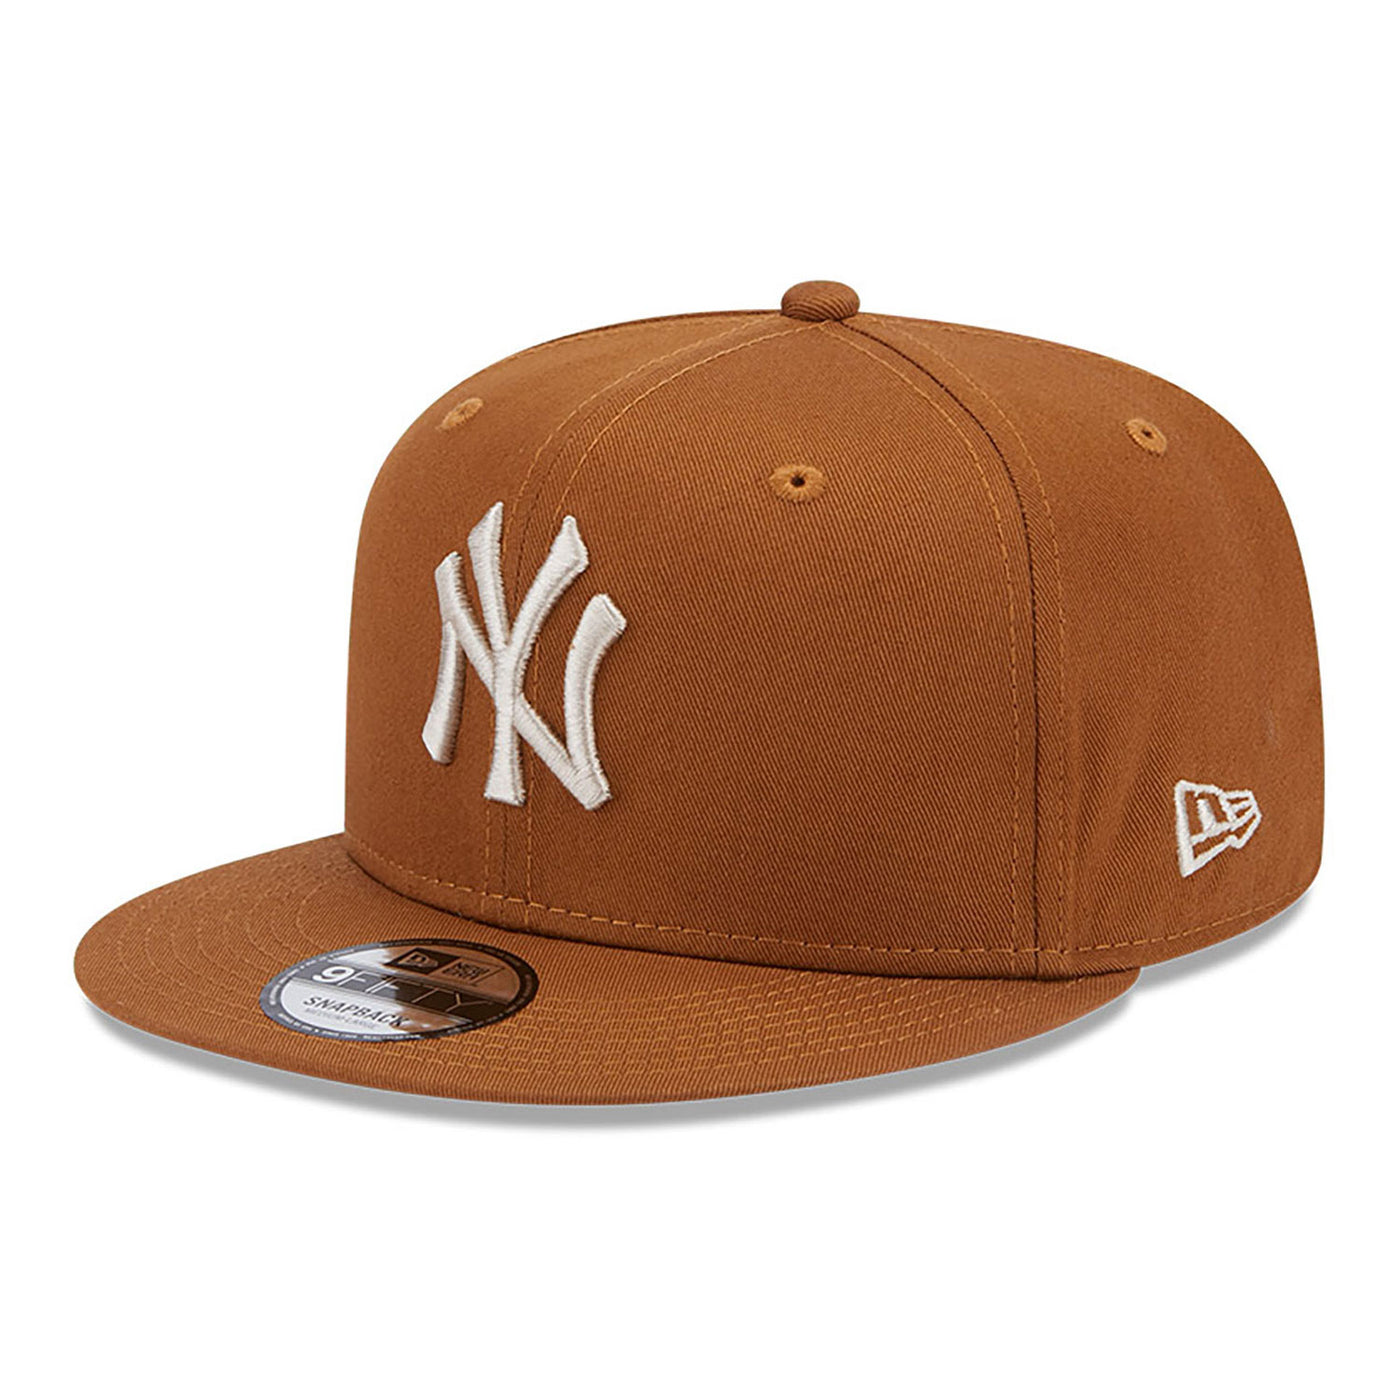 New Era League Essential 9Fifty NY Yankees brown